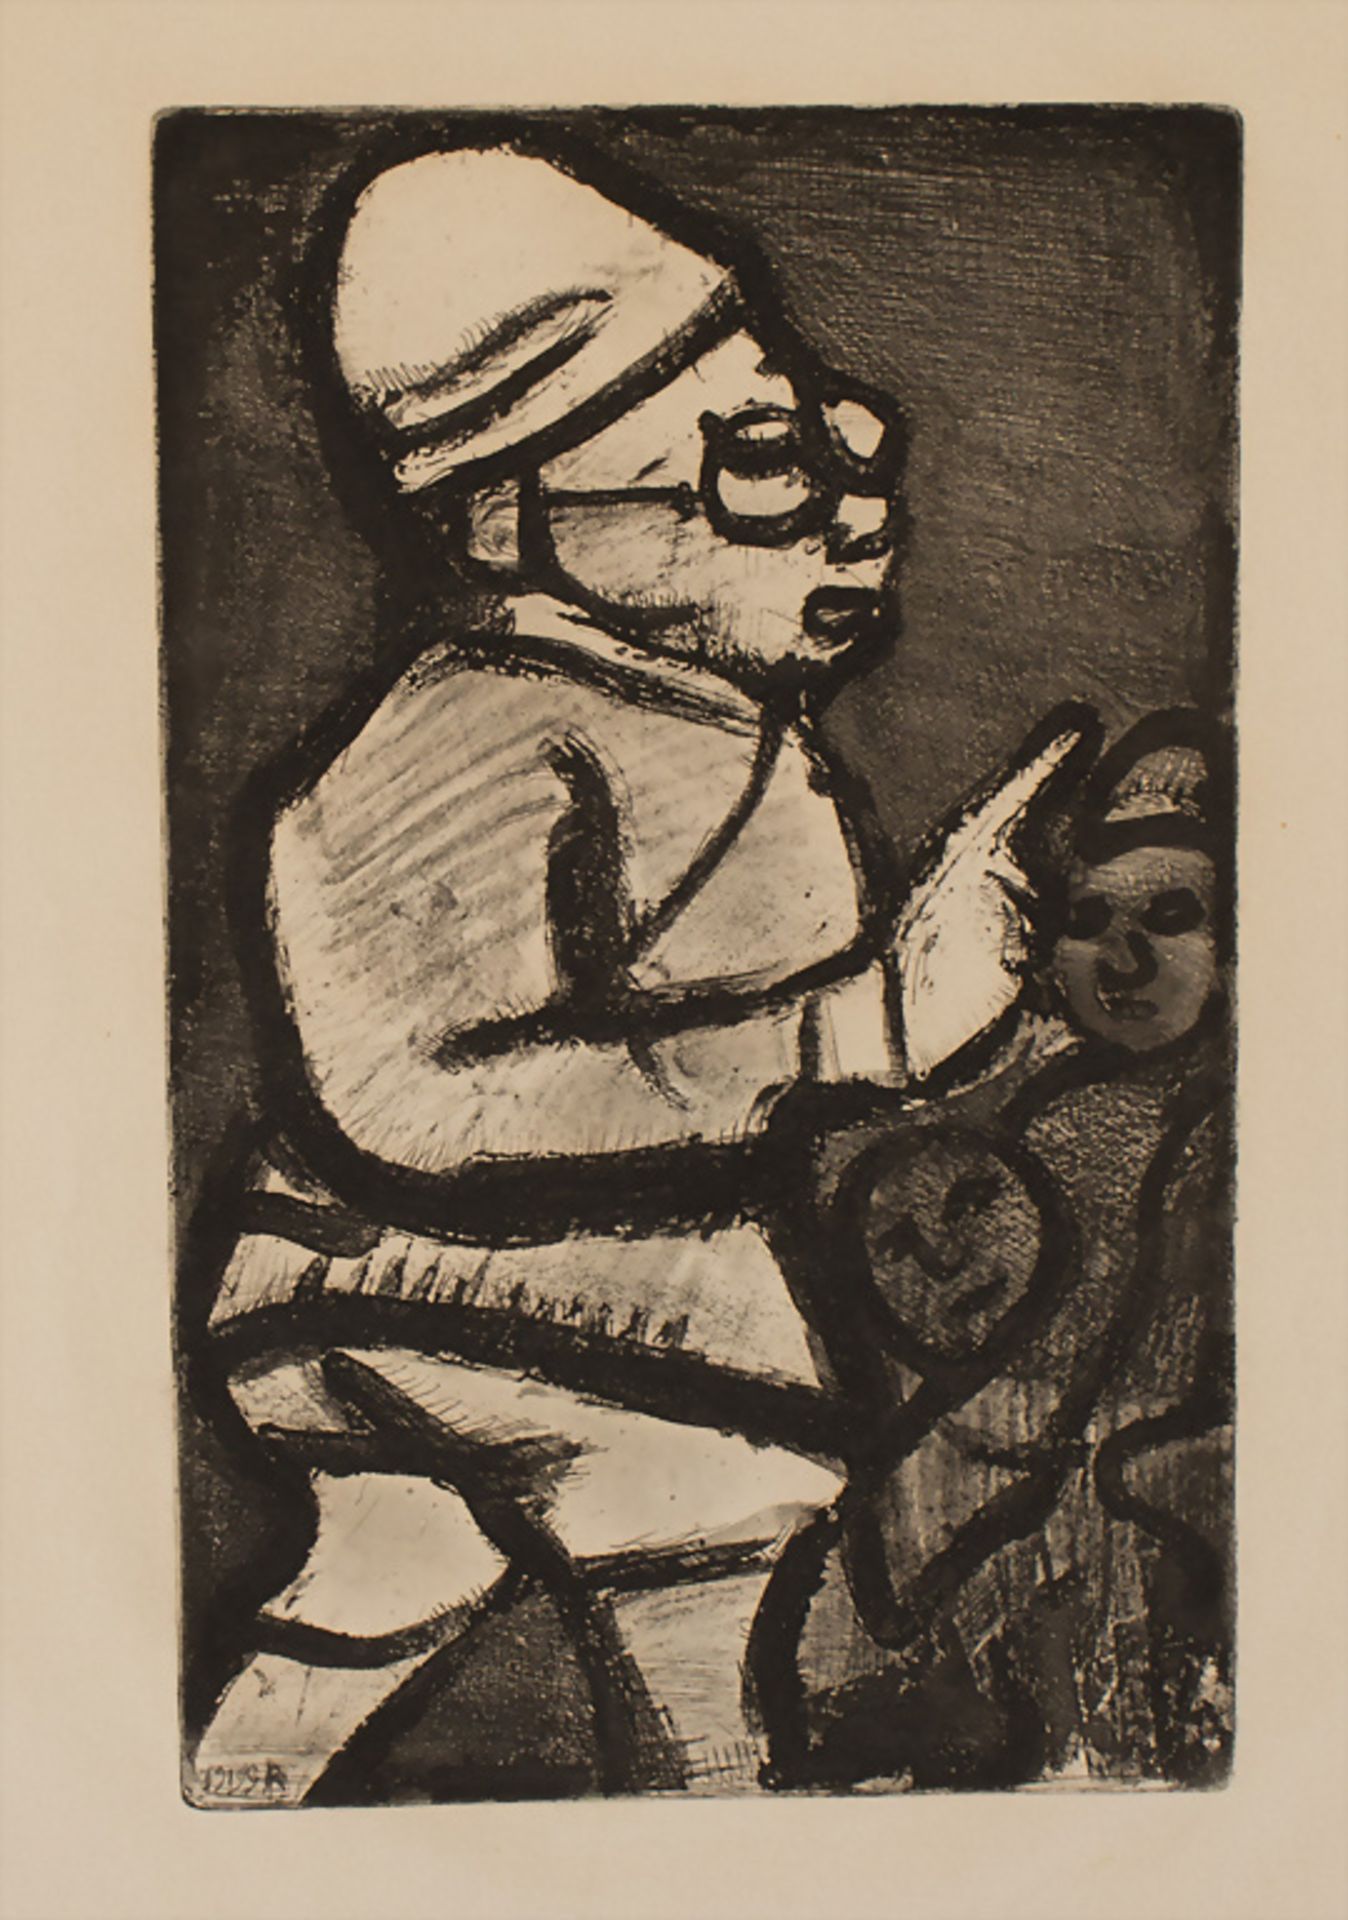 Georges Rouault (1871-1958), 'L'administrateur colonial' / 'The colonial administrator', 1919